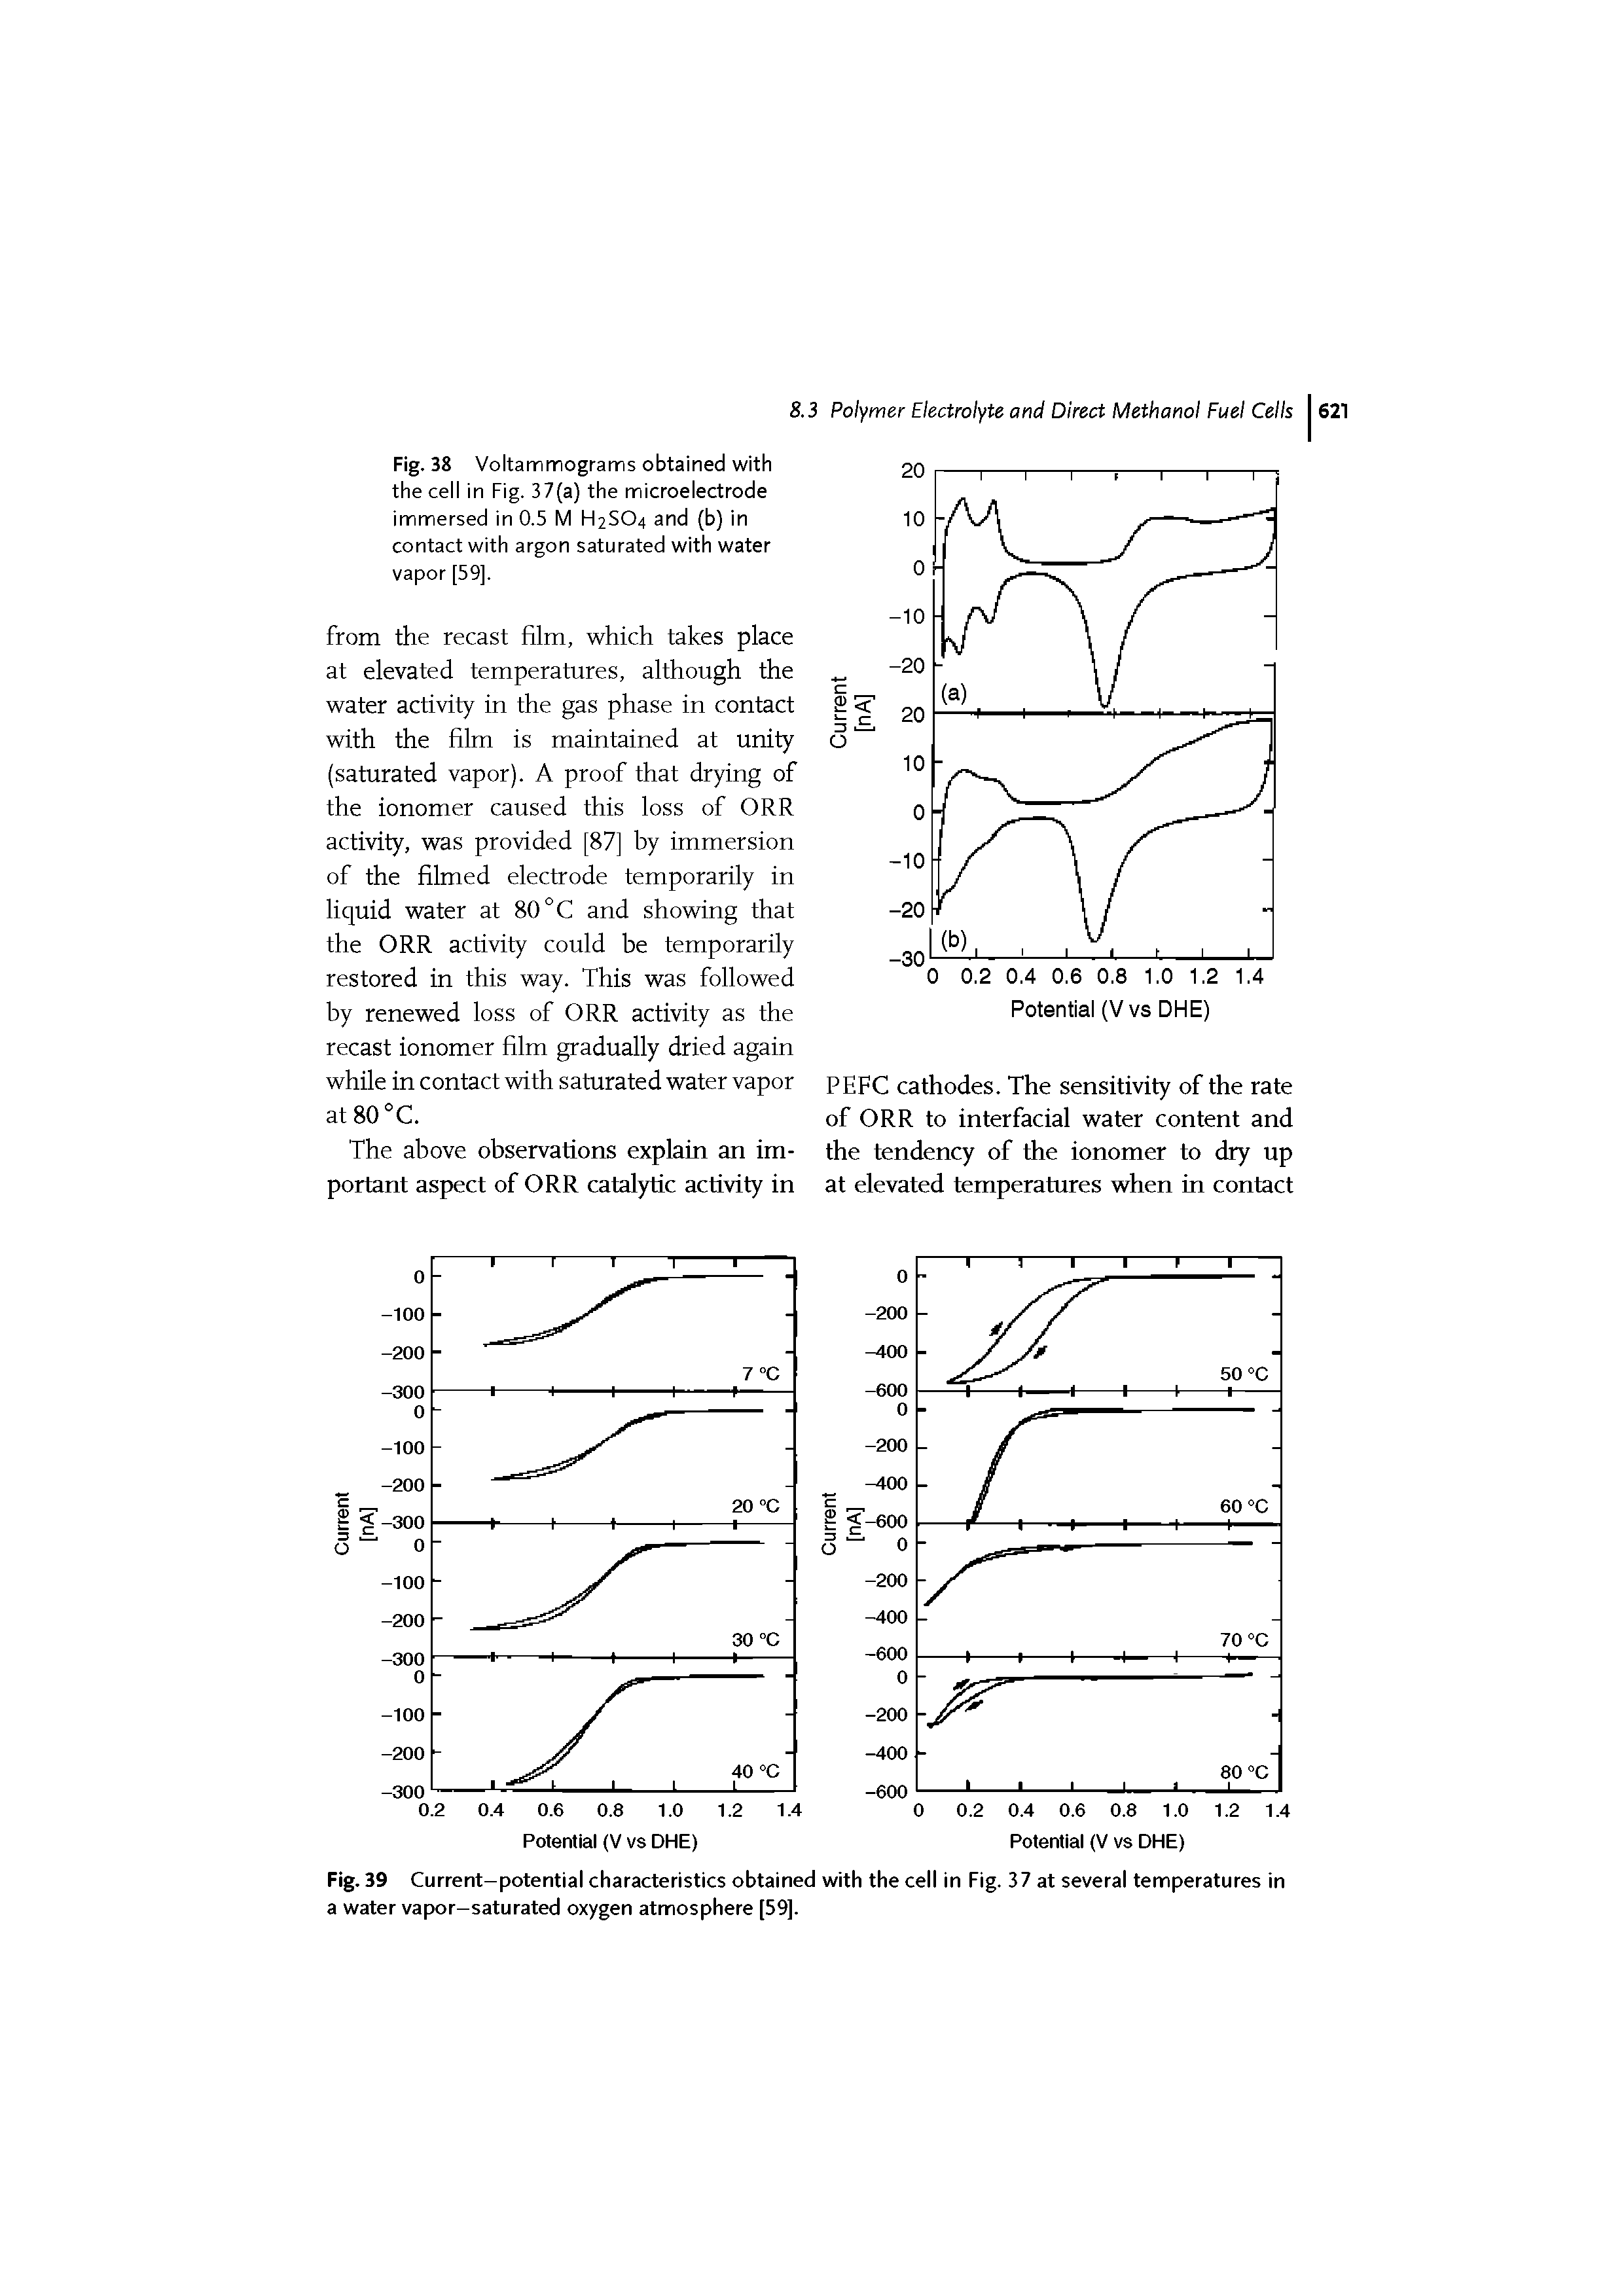 Fig. 39 Current-potential characteristics obtained a water vapor-saturated oxygen atmosphere [59].